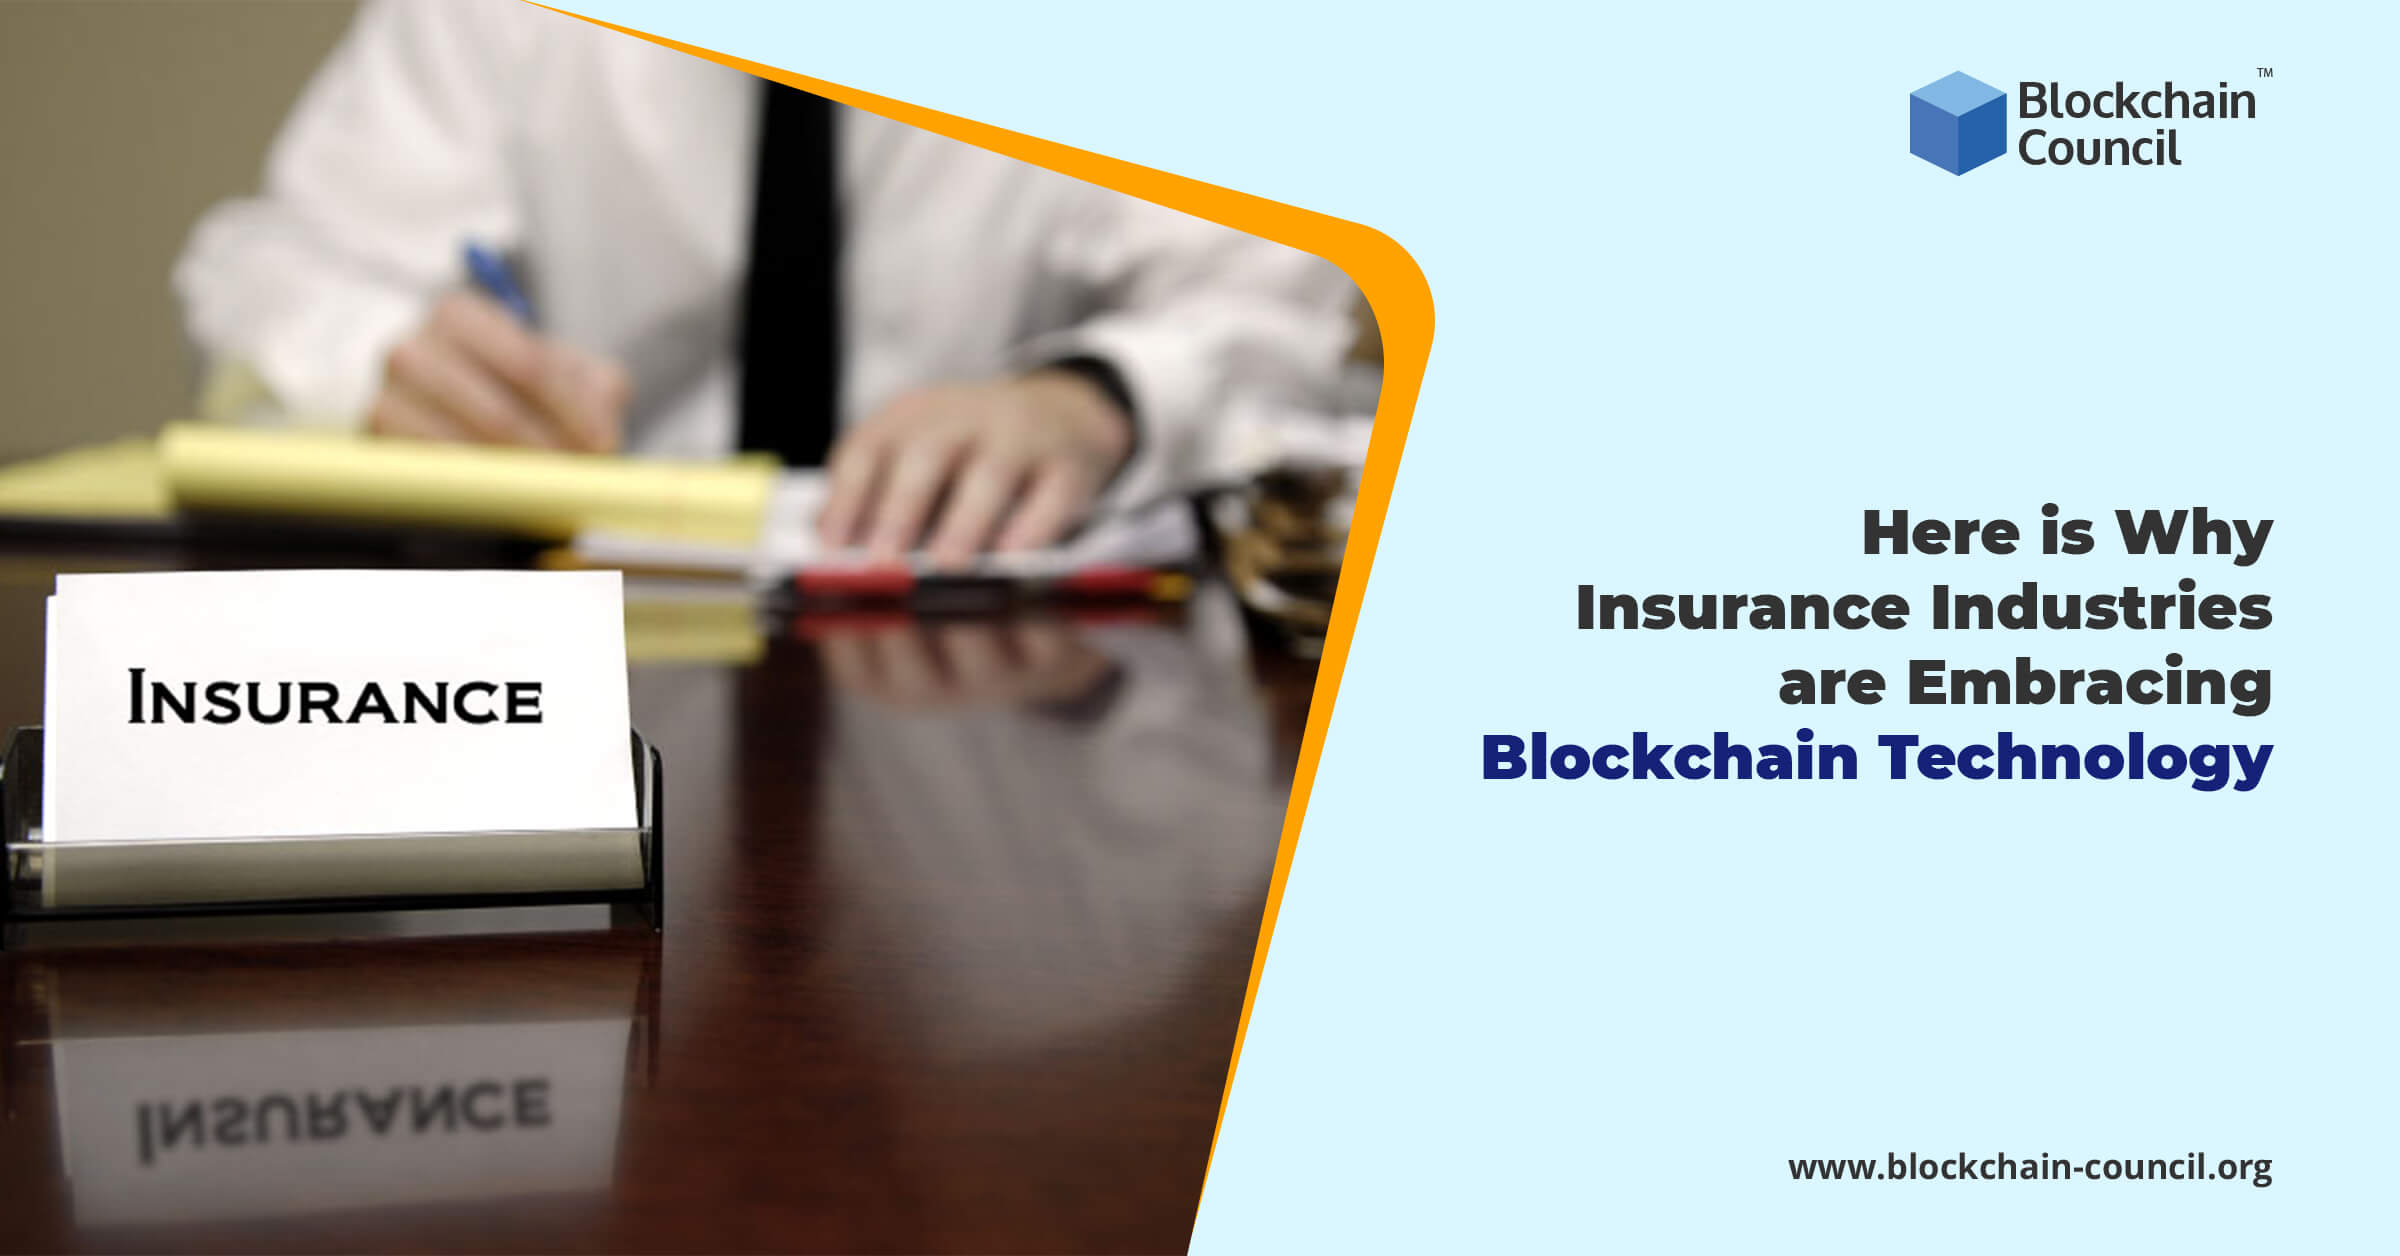 Here is Why Insurance Industries are Embracing Blockchain Technology